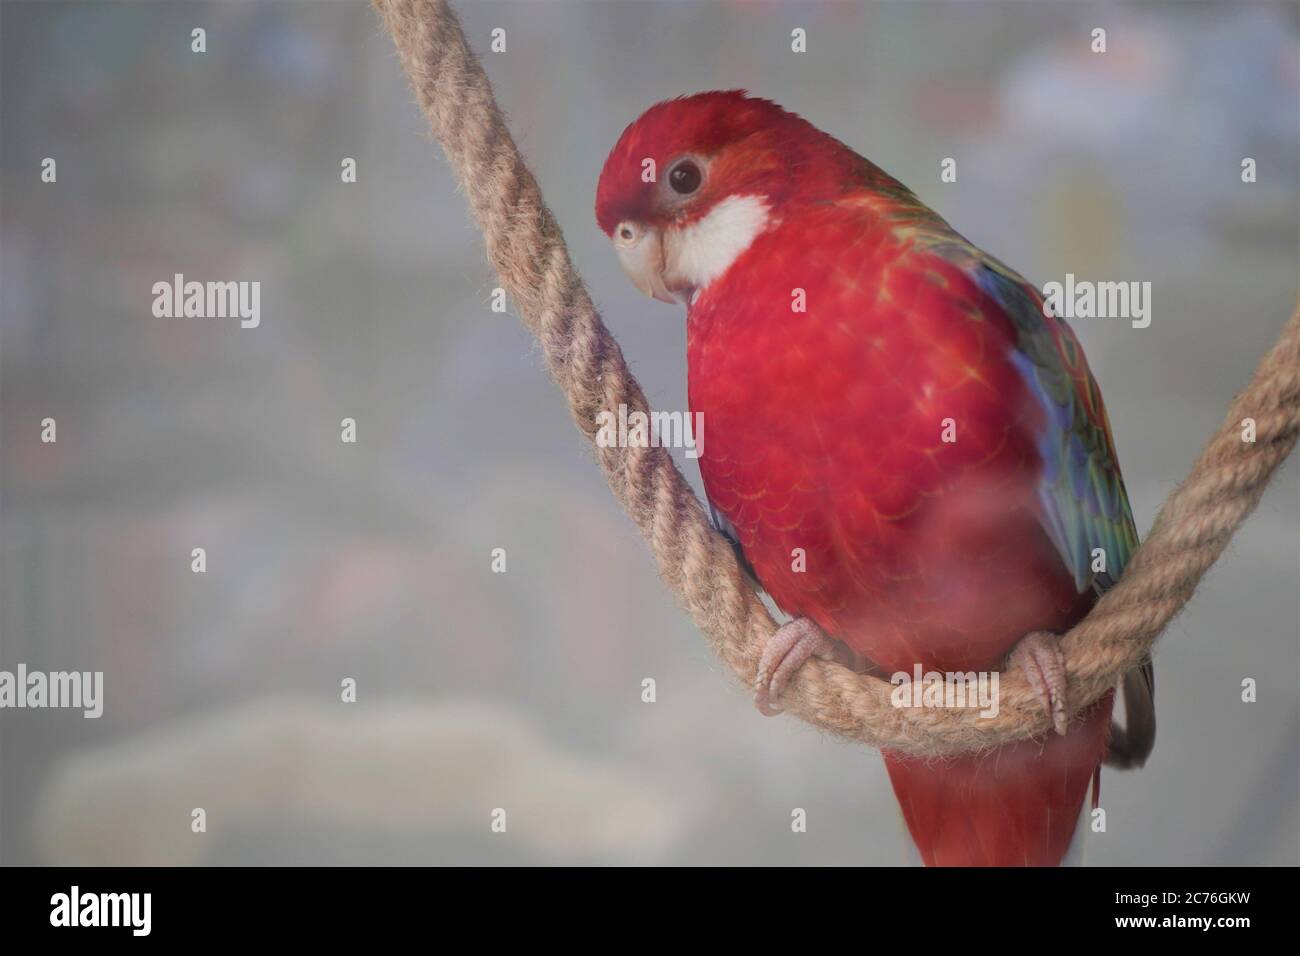 Large pink rosella Platycercus elegans parrot siting on a rope in a pet shope window,close-up. Stock Photo